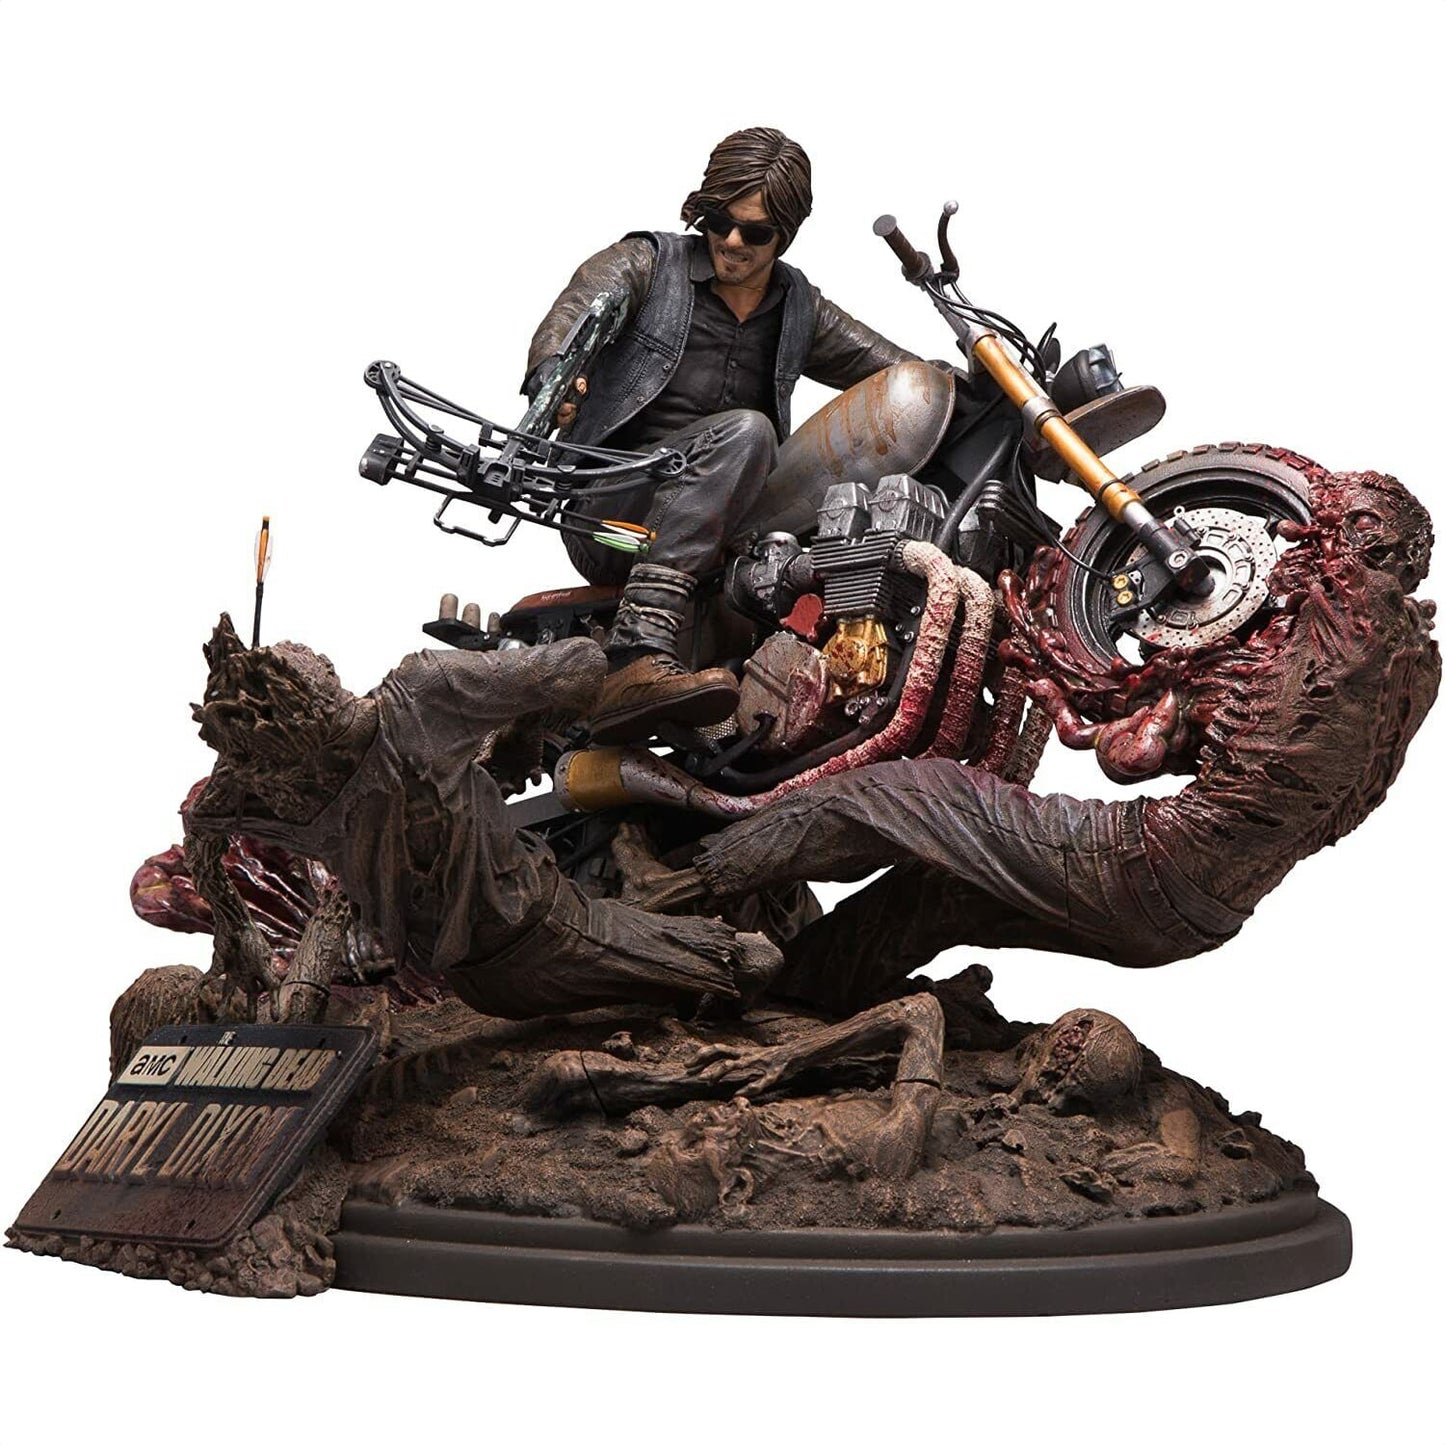 Mcfarlane The Walking Dead Daryl Dixon Limited Edition Resin Statue